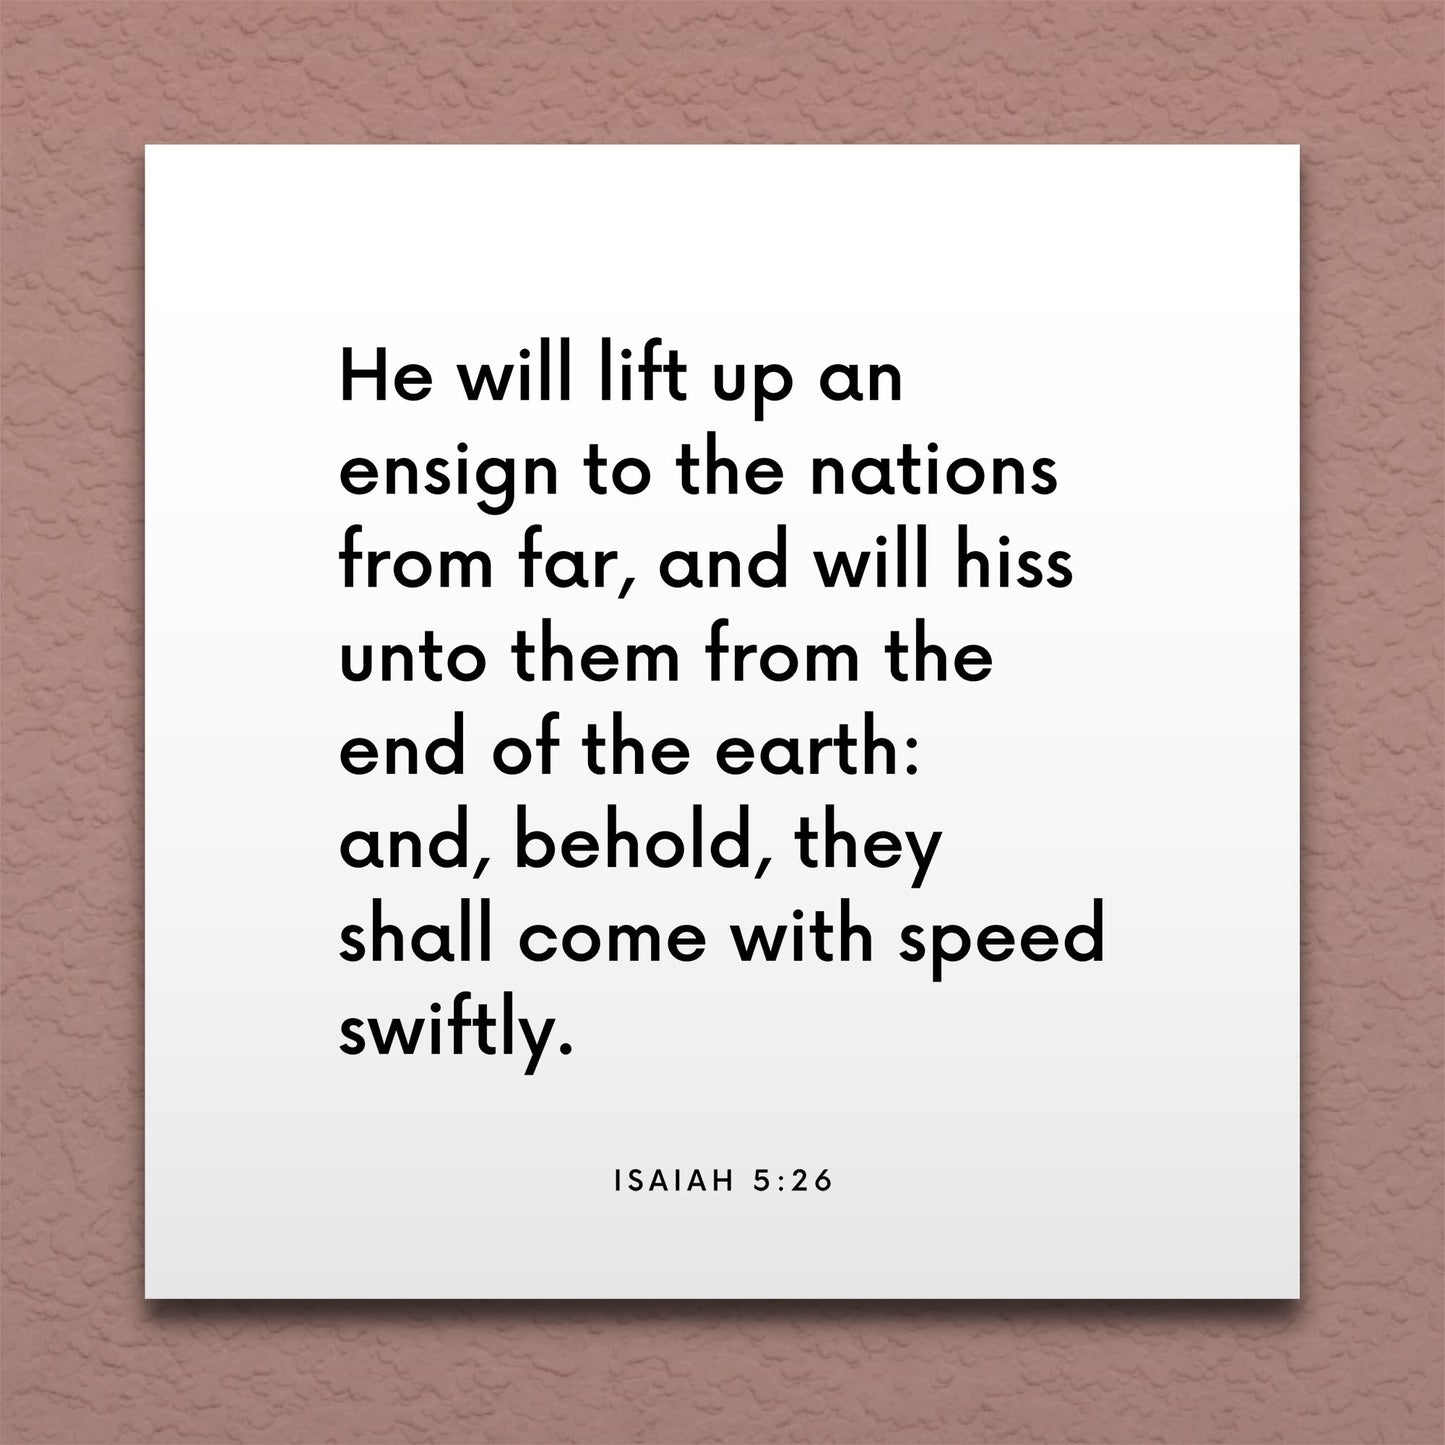 Wall-mounted scripture tile for Isaiah 5:26 - "He will lift up an ensign to the nations from far"